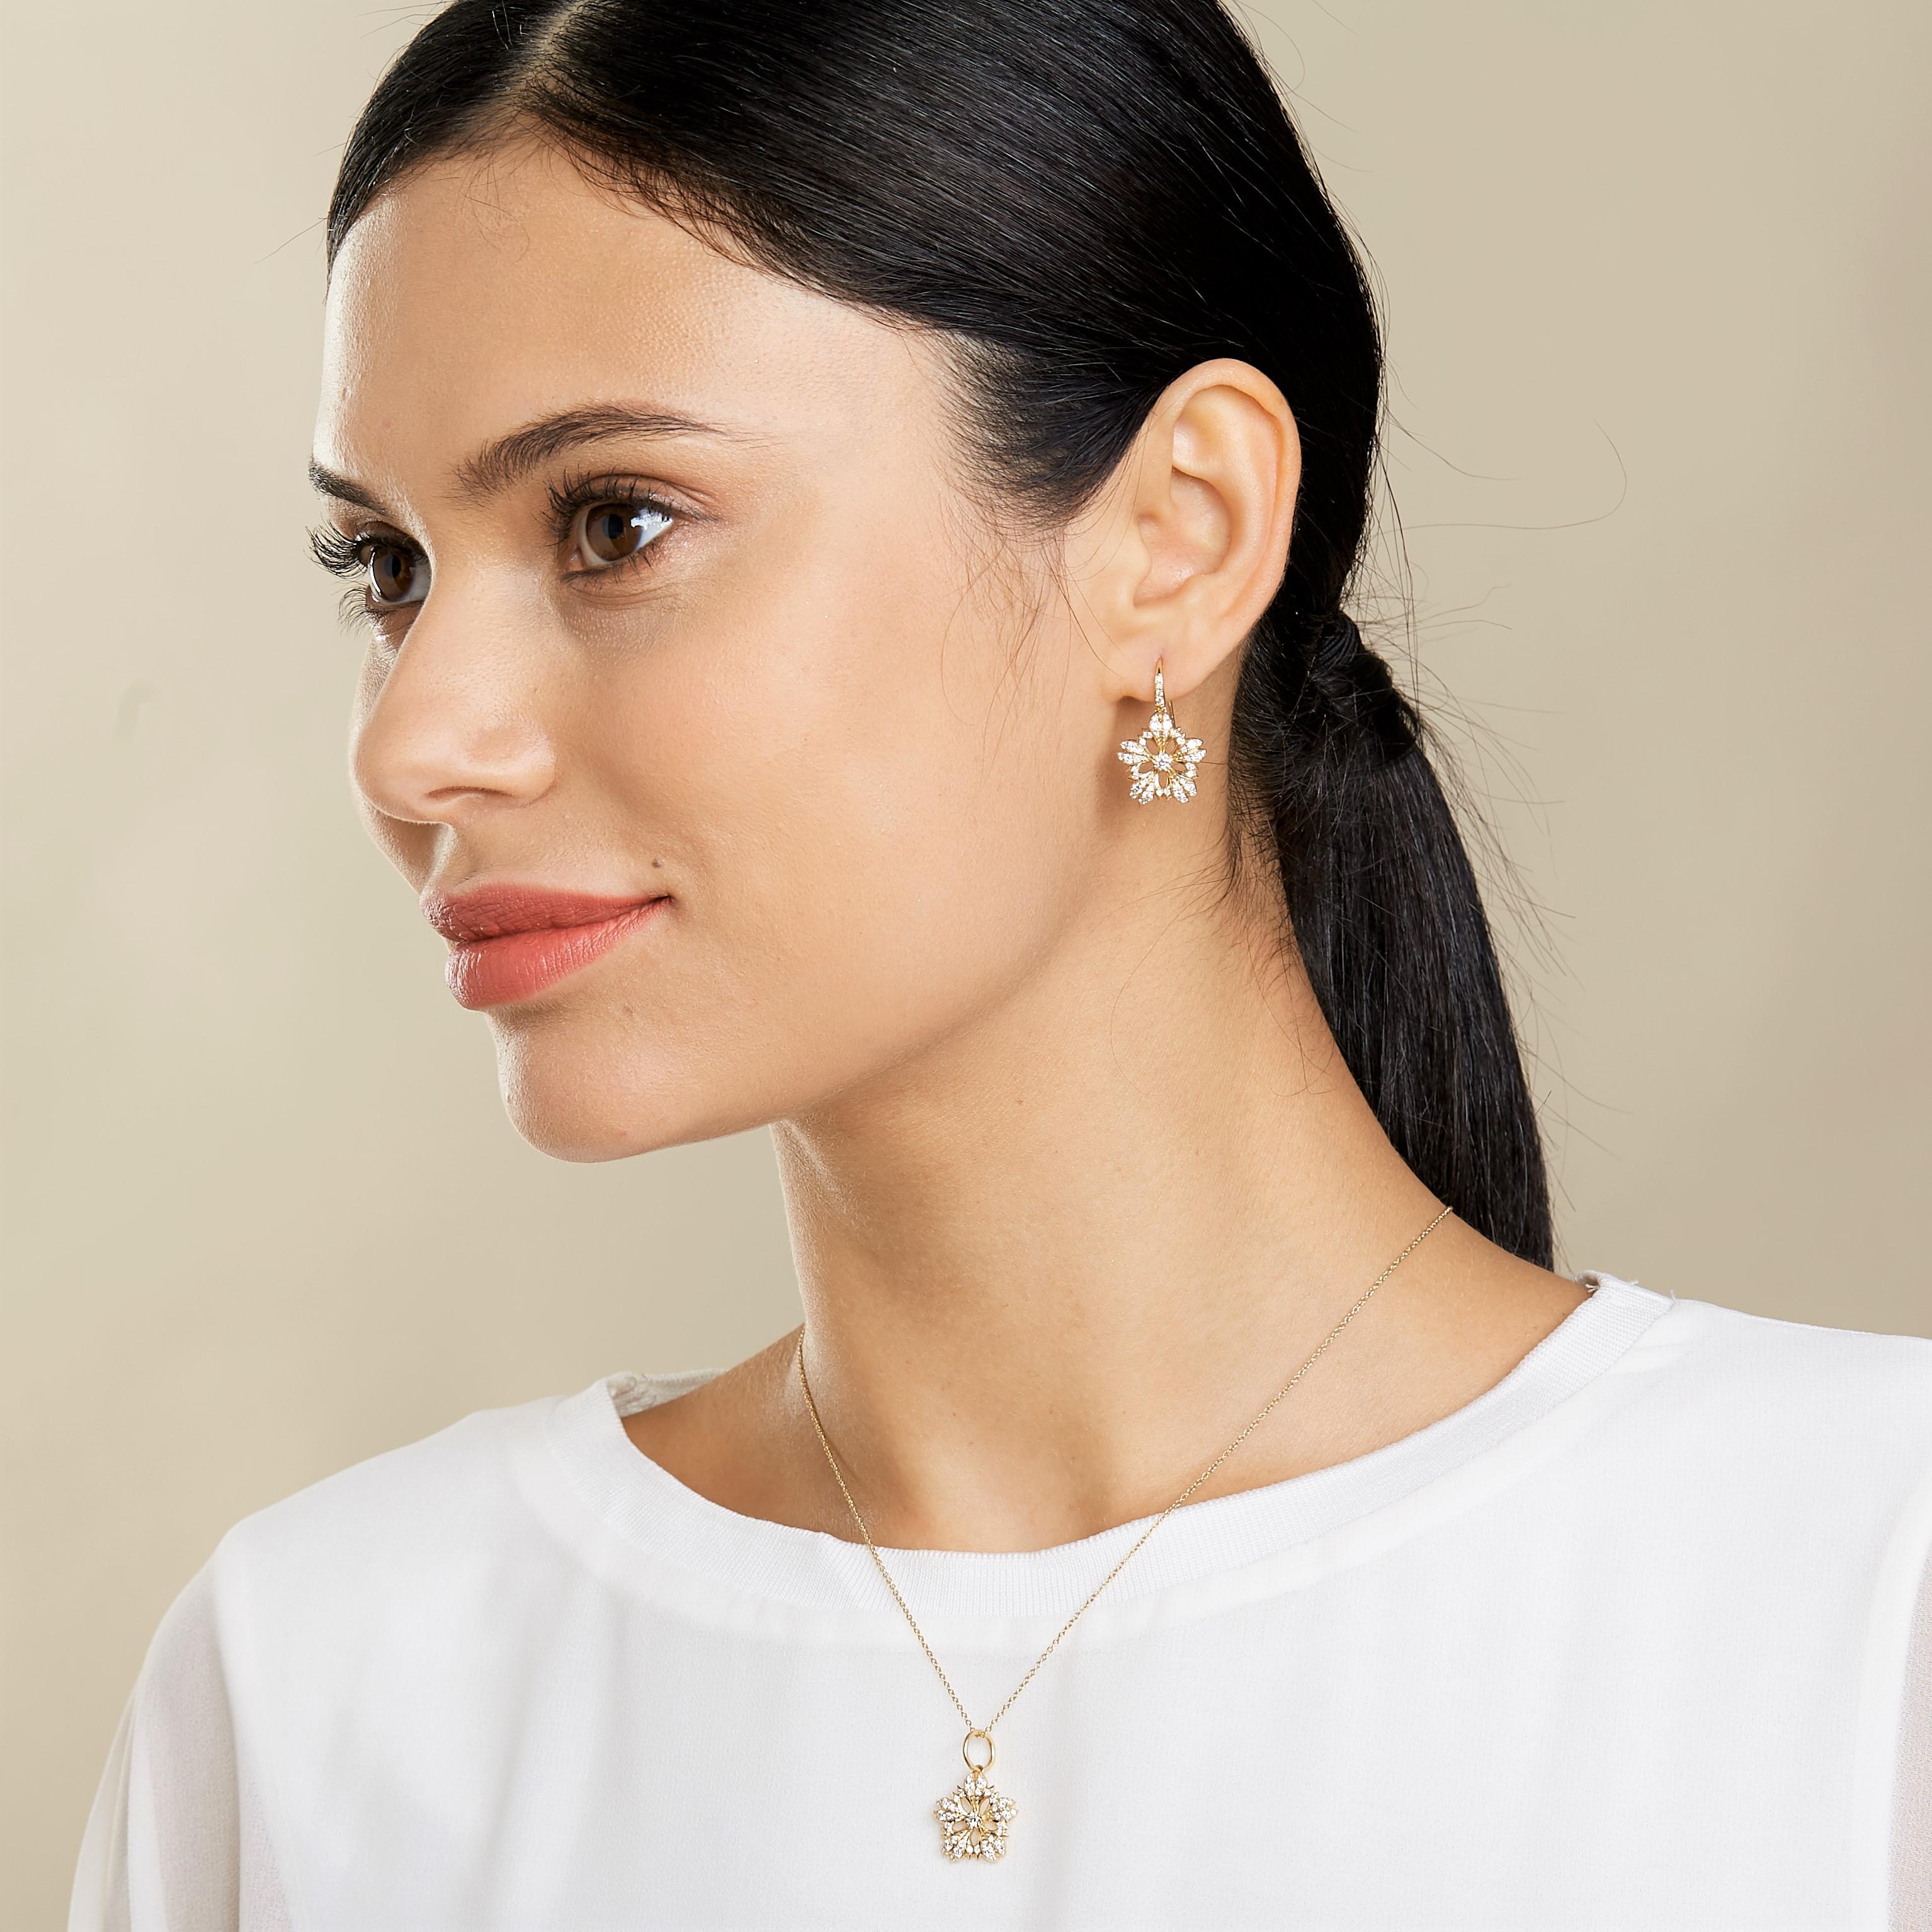 Created in 18kyg
Diamonds 0.40 ct approx
18kyg 18 inch cable chain with lobster lock
Chain can be worn at 17th inch & 16th inch

Handcrafted from 18-karat yellow gold, this stunning Necklace is encrusted with an impressive 0.40 carats of dazzling